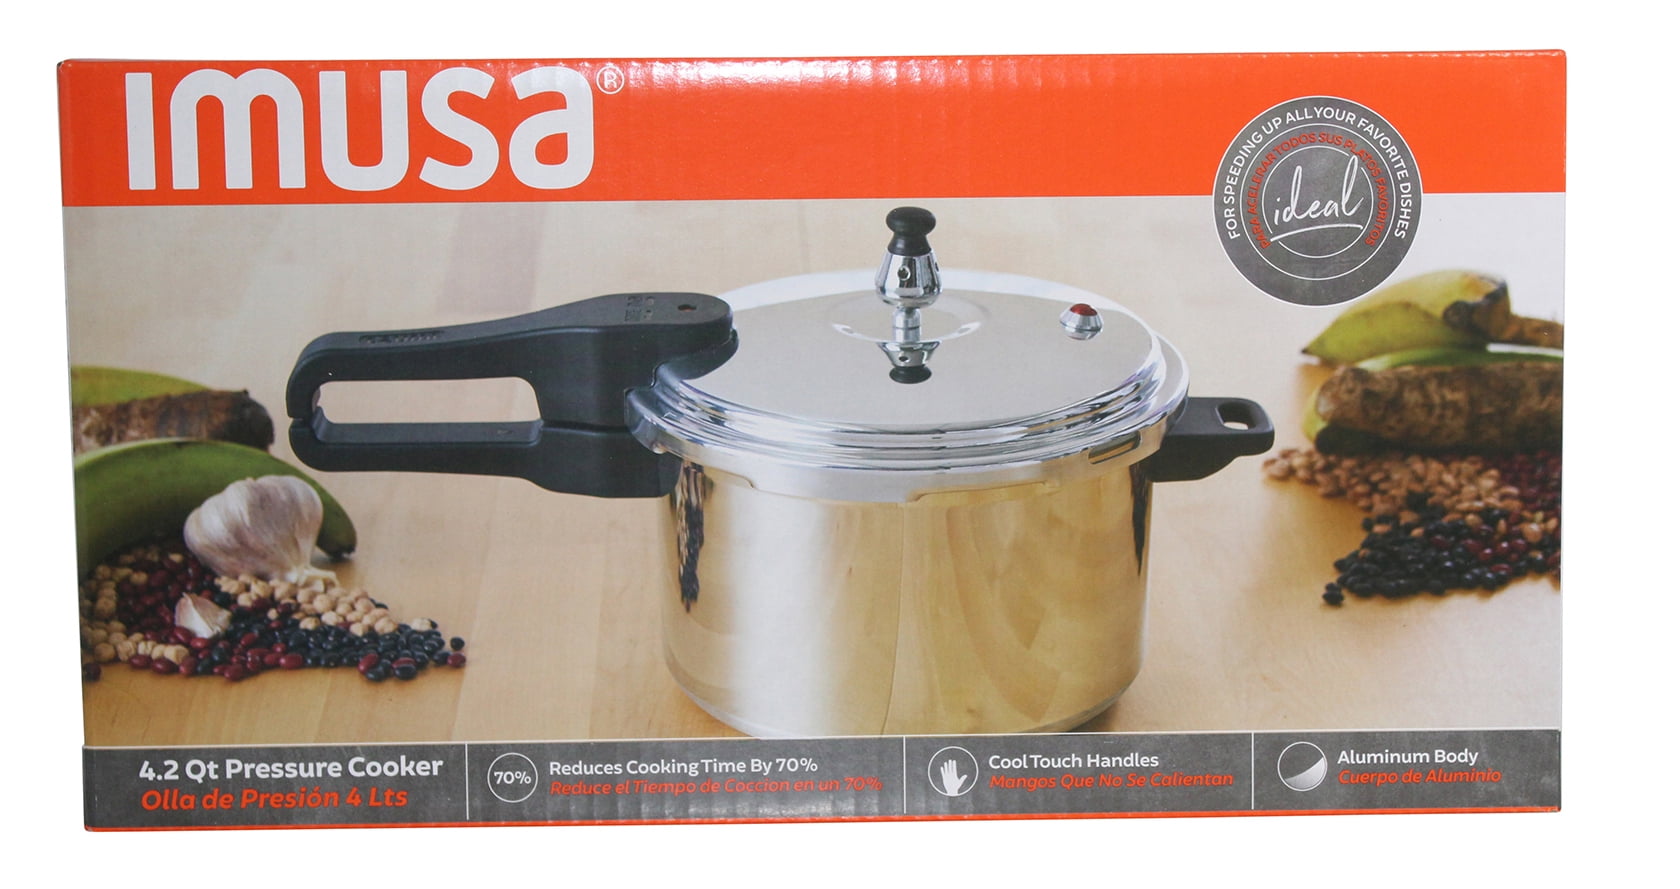 BrandsMart USA - Busy? Speed up your cooking time by 70% with the IMUSA  pressure cooker! Shop now! 🛍 #BrandsMartUSA #IMUSA